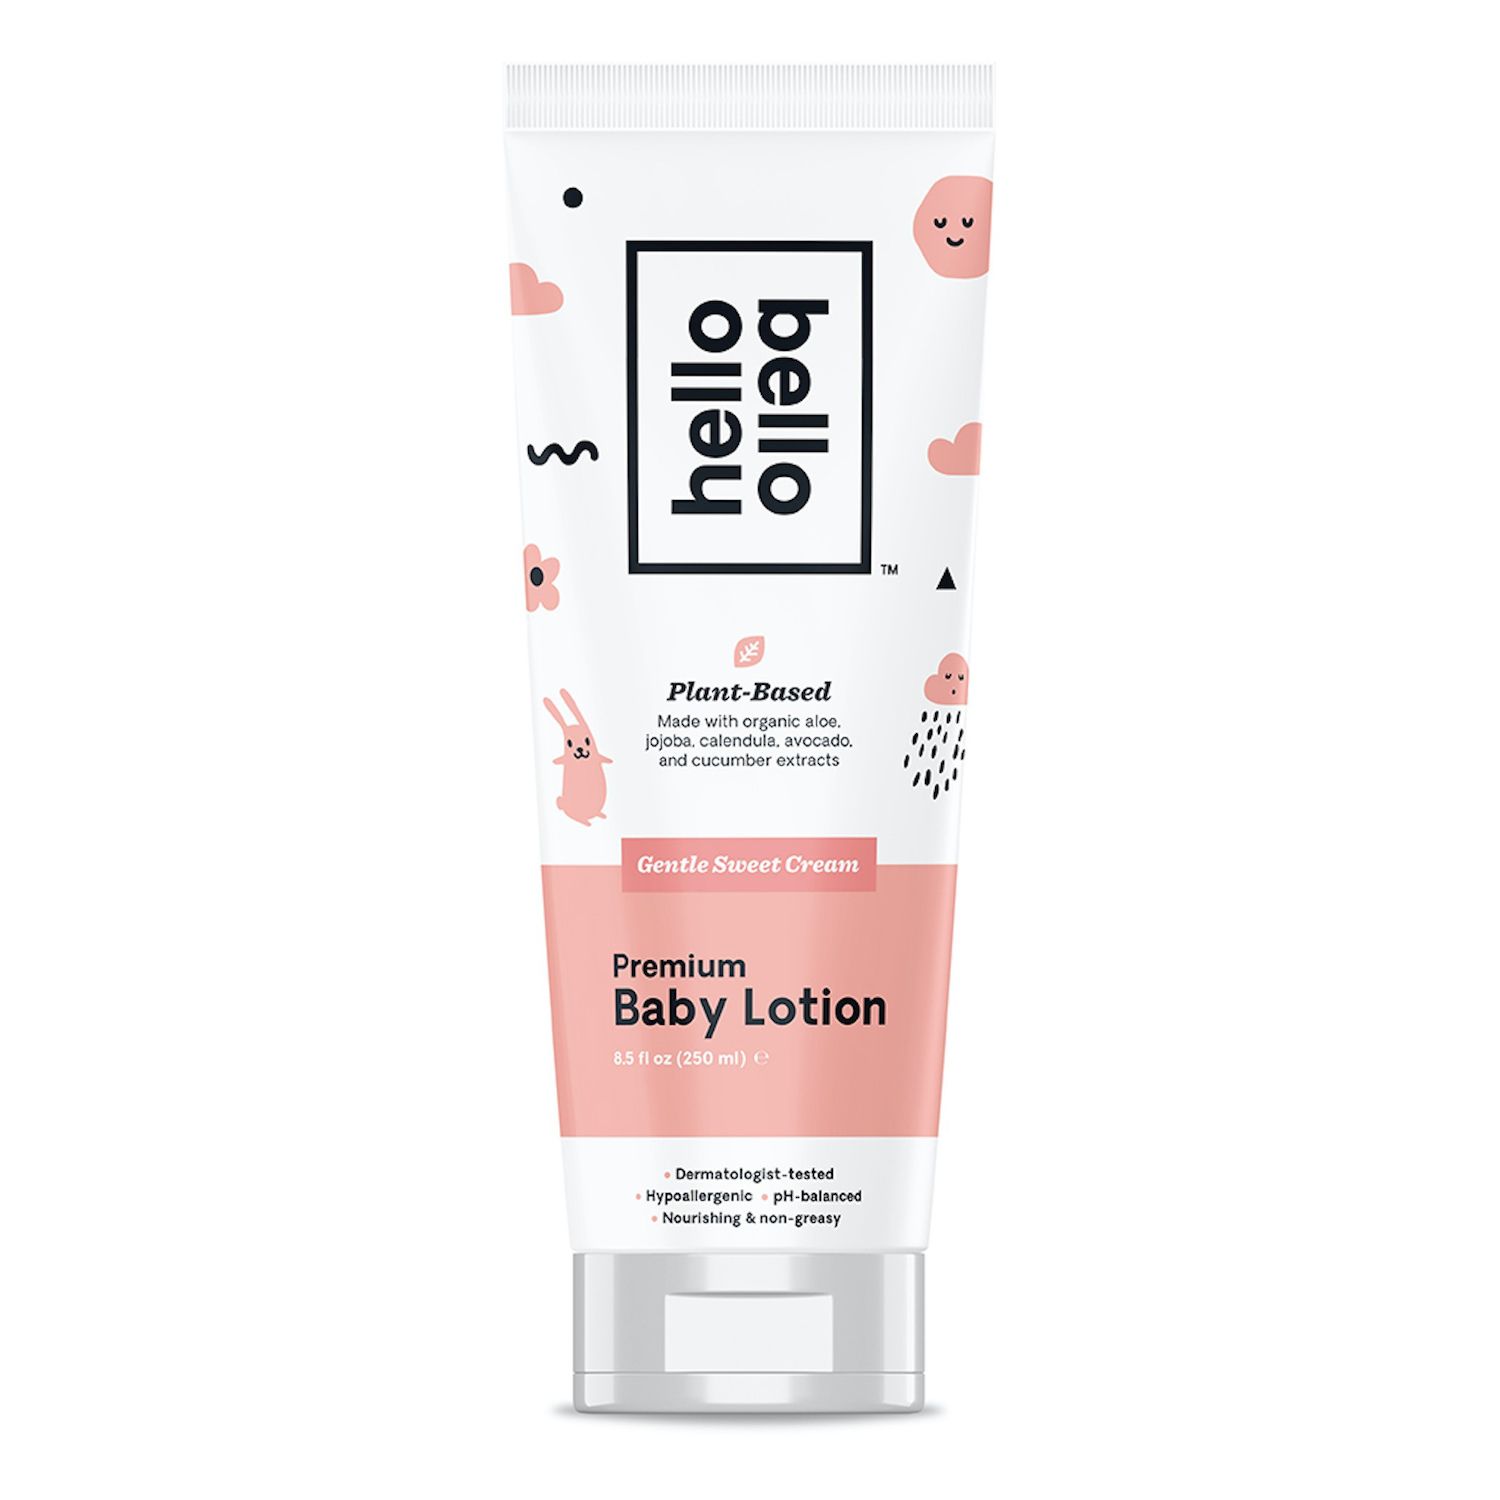 Image for Hello Bello Baby Lotion Sweet Cream at Kohl's.